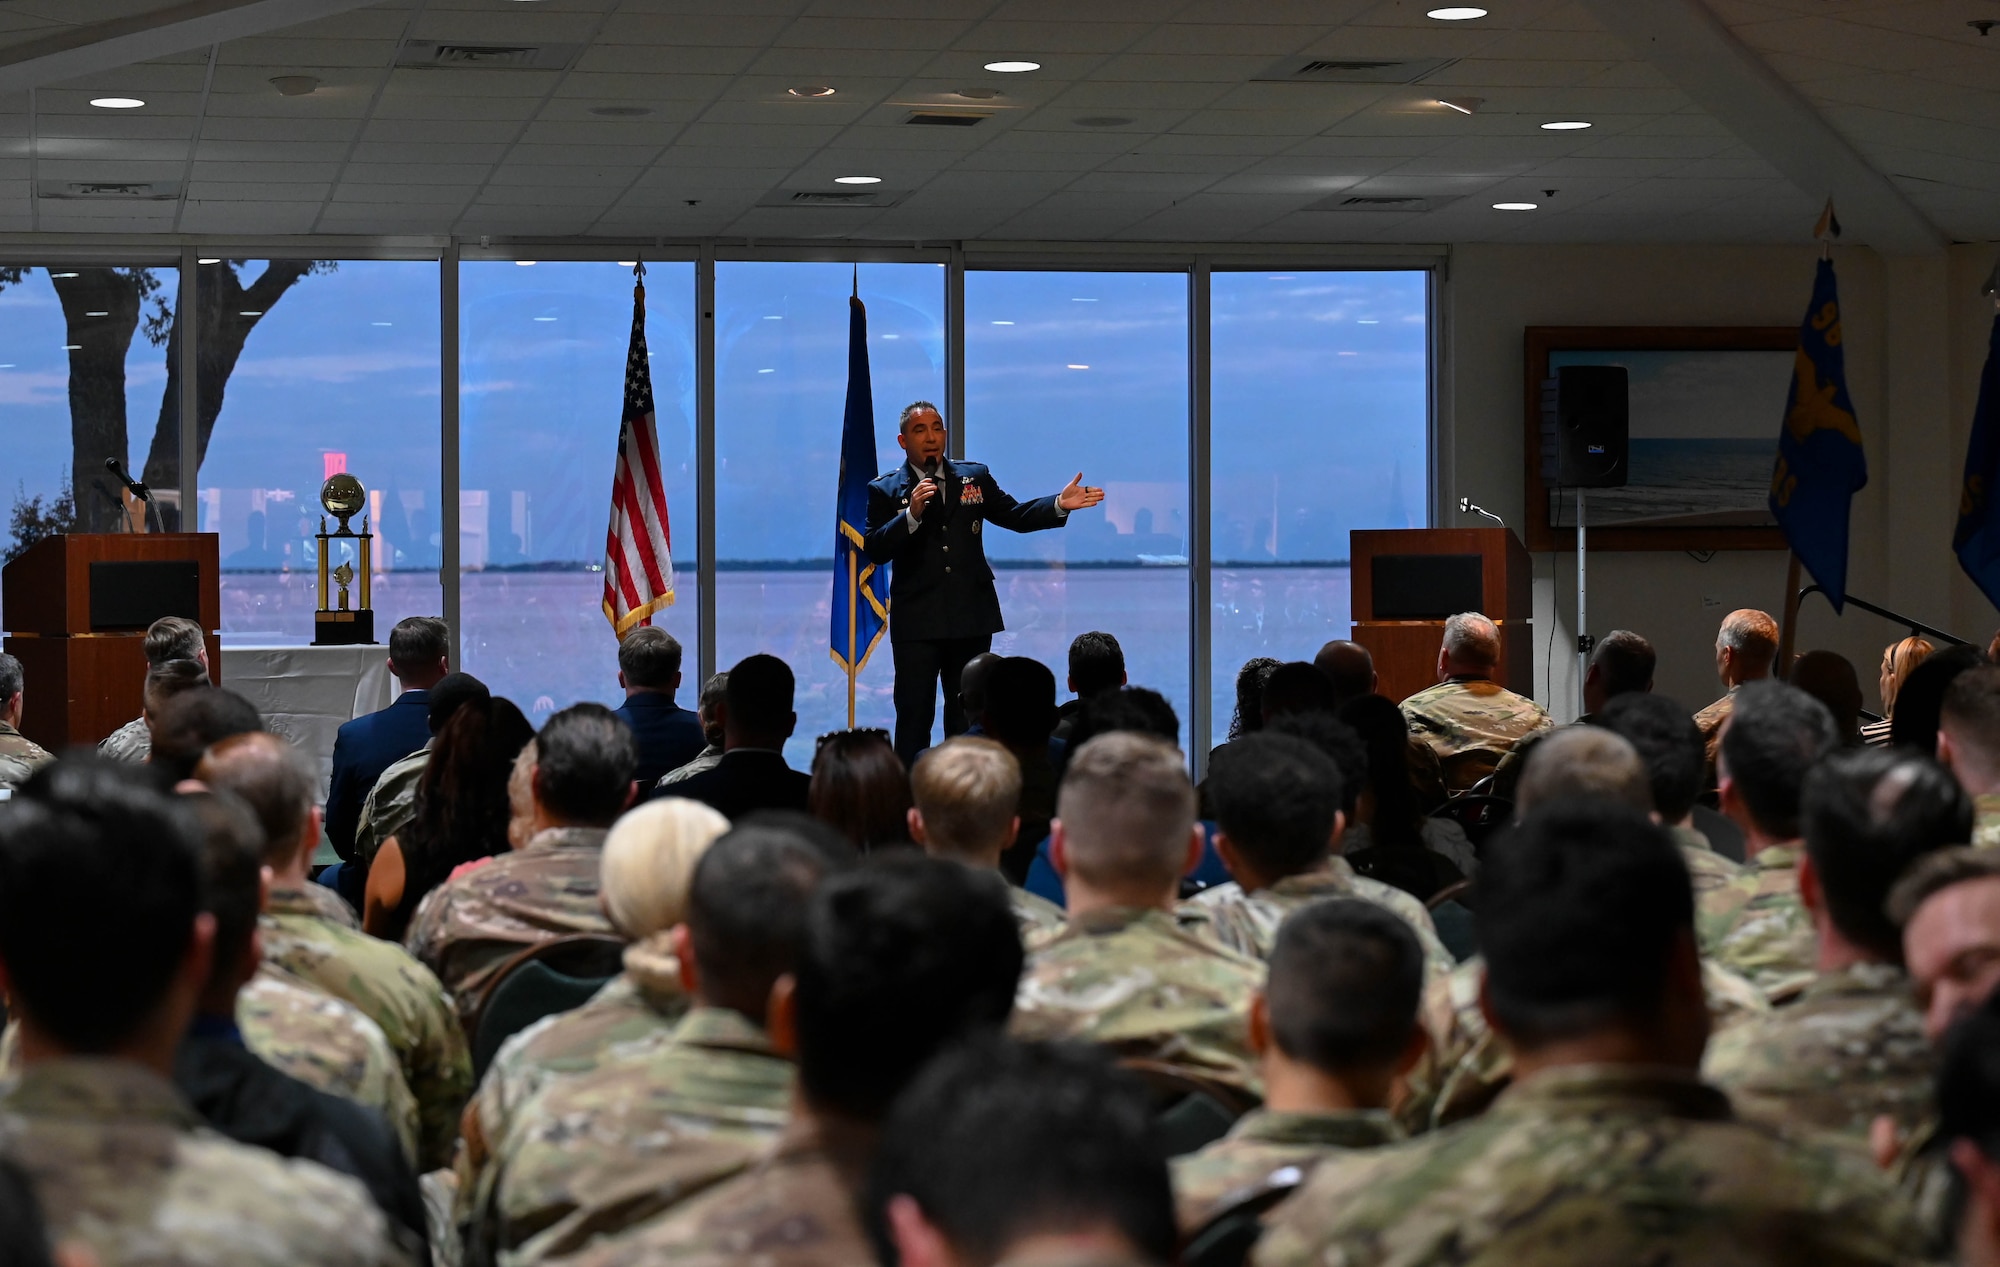 U.S. Air Force Col. Josh Koslov, 350th Spectrum Warfare Wing commander, gives closing remarks during the Airman Leadership School Class 24-Alpha graduation ceremony at Eglin Air Force Base, Fla., Dec. 7, 2023. The 350th SWW sponsored class 24-A and had the opportunity to speak to the students during their course, present the awards at graduation and give closing remarks. (U.S. Air Force photo by Capt. Benjamin Aronson)